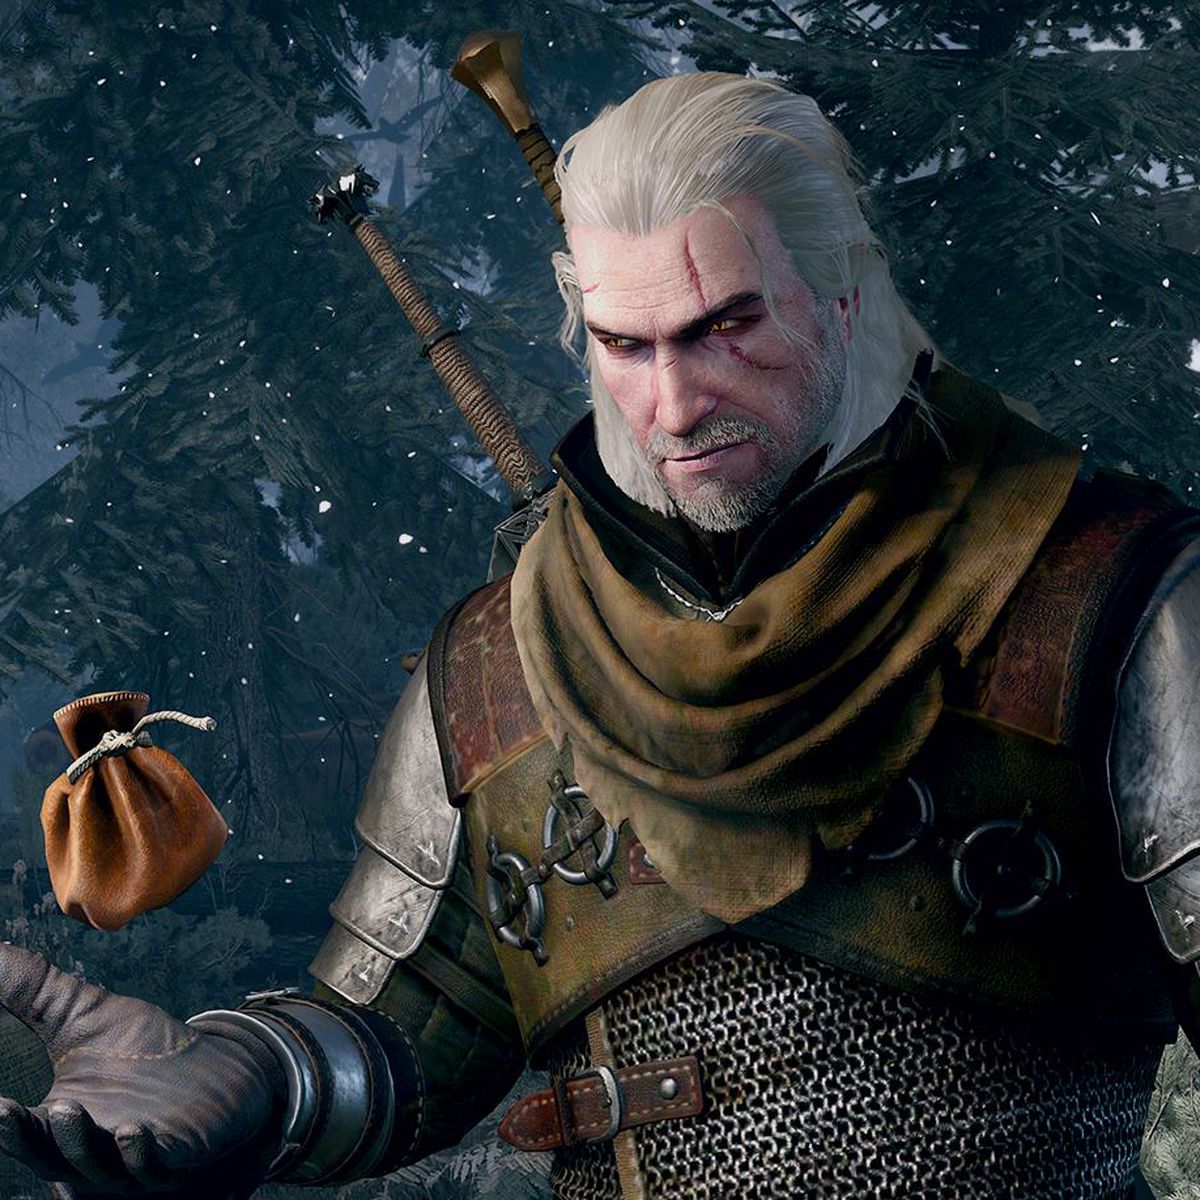 Geralt of Rivia in The Witcher 3: Wild Hunt stands staring at a bag of coins in his hand